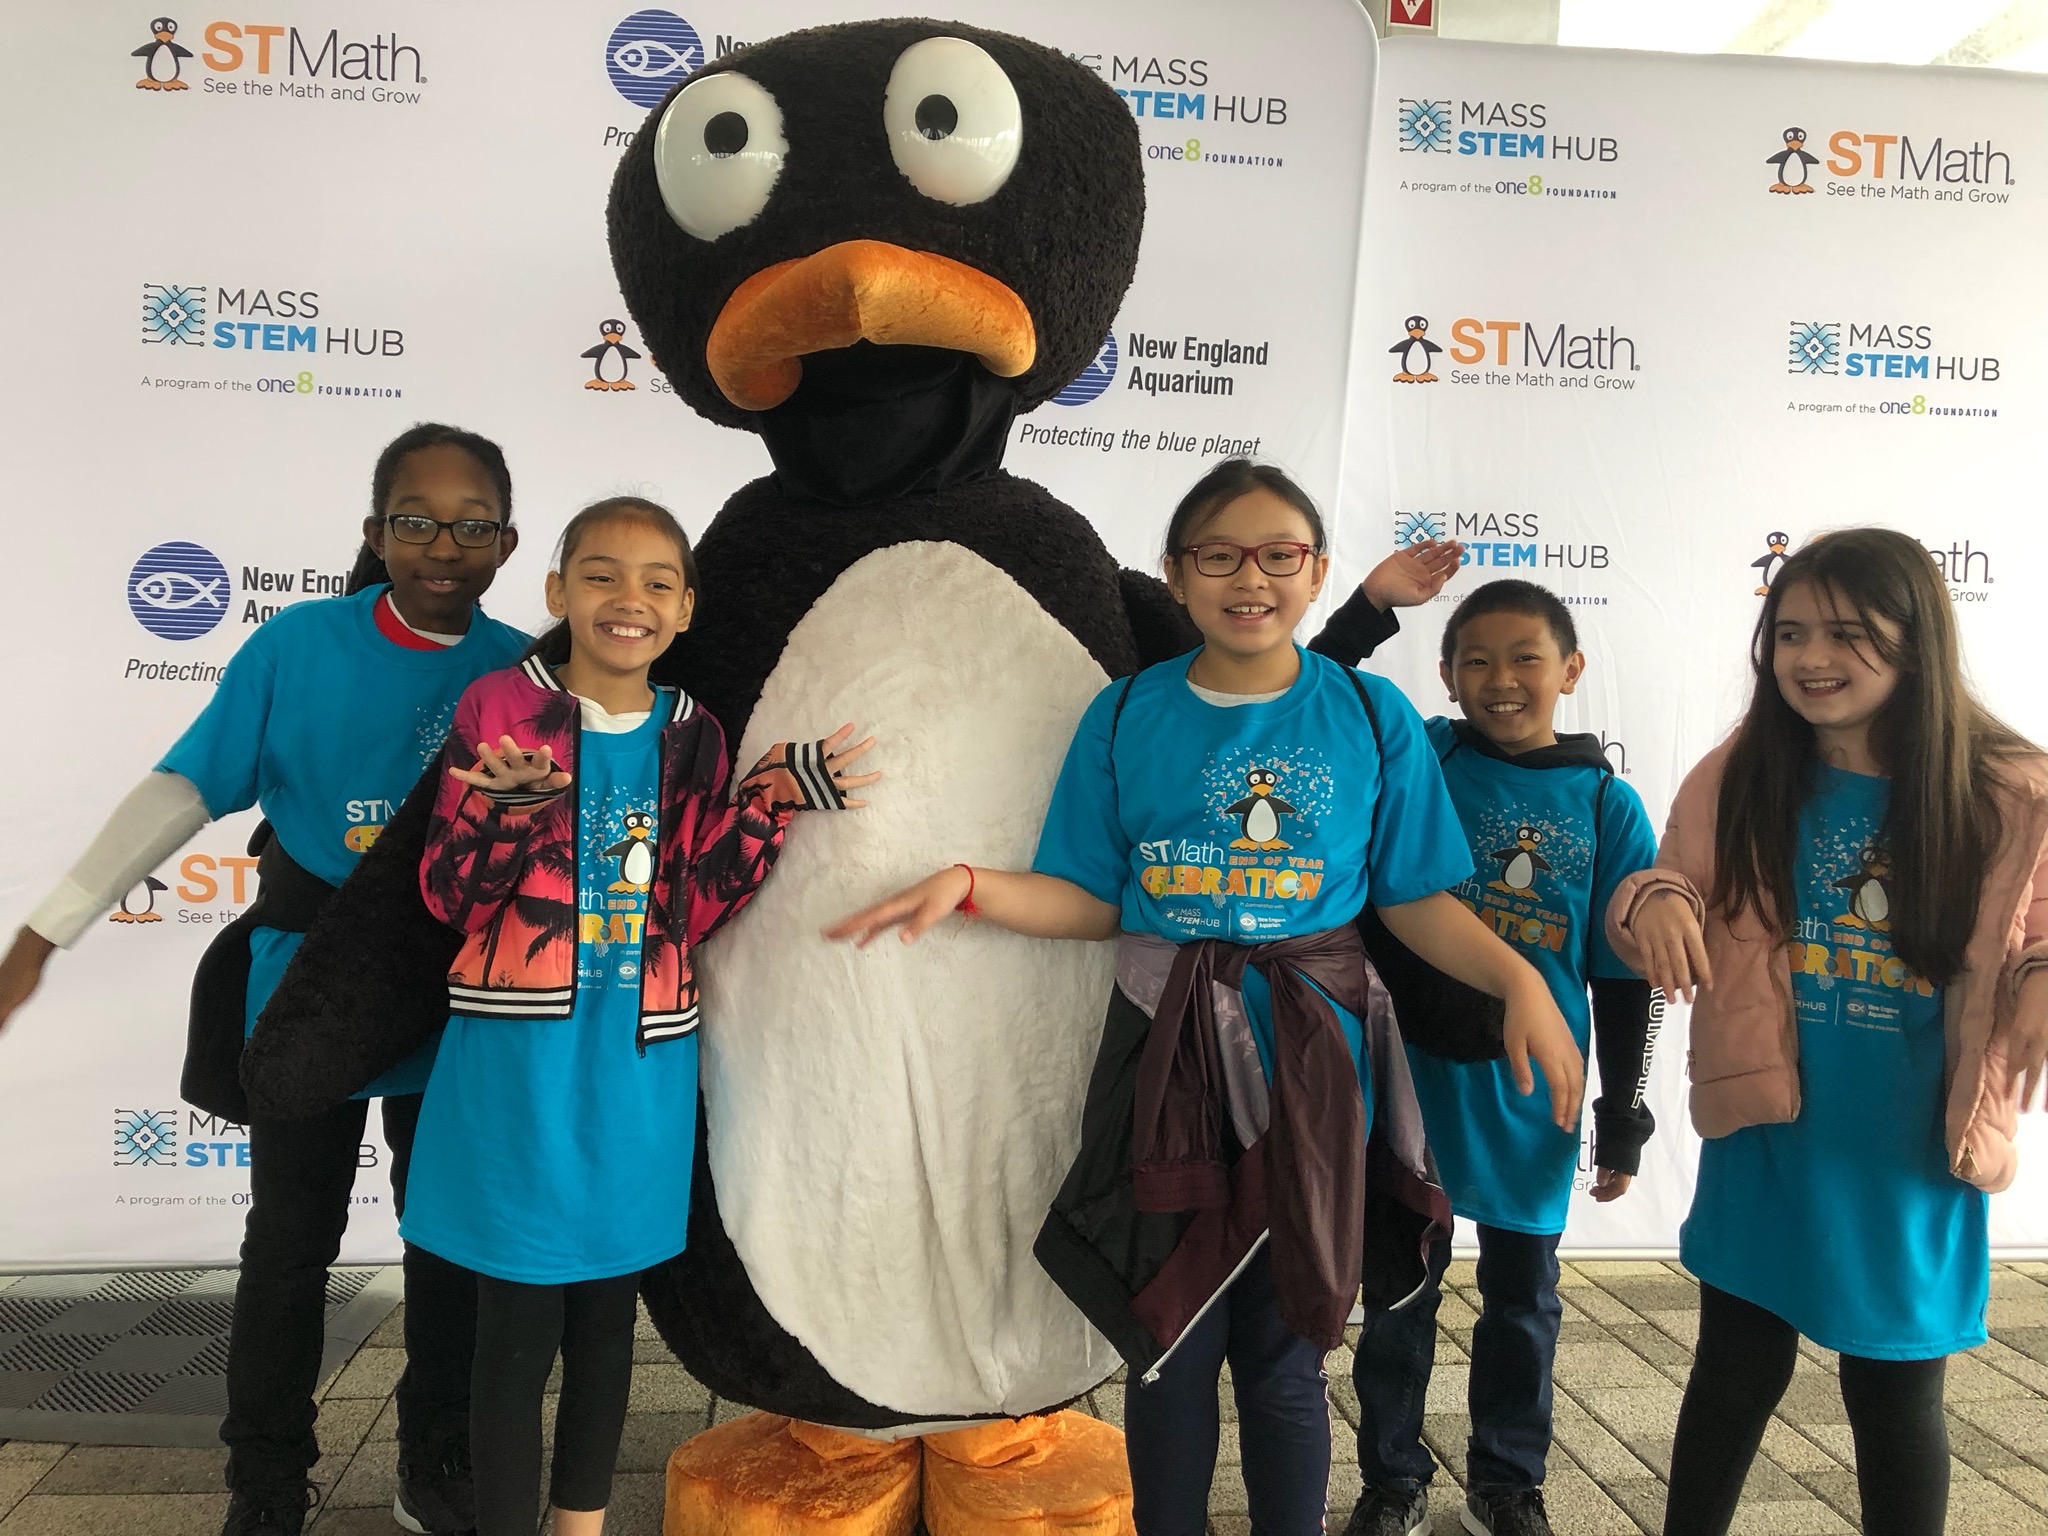 Students strike a pose with JiJi, the loveable penguin mascot from ST Math, during a celebration at the New England Aquarium.